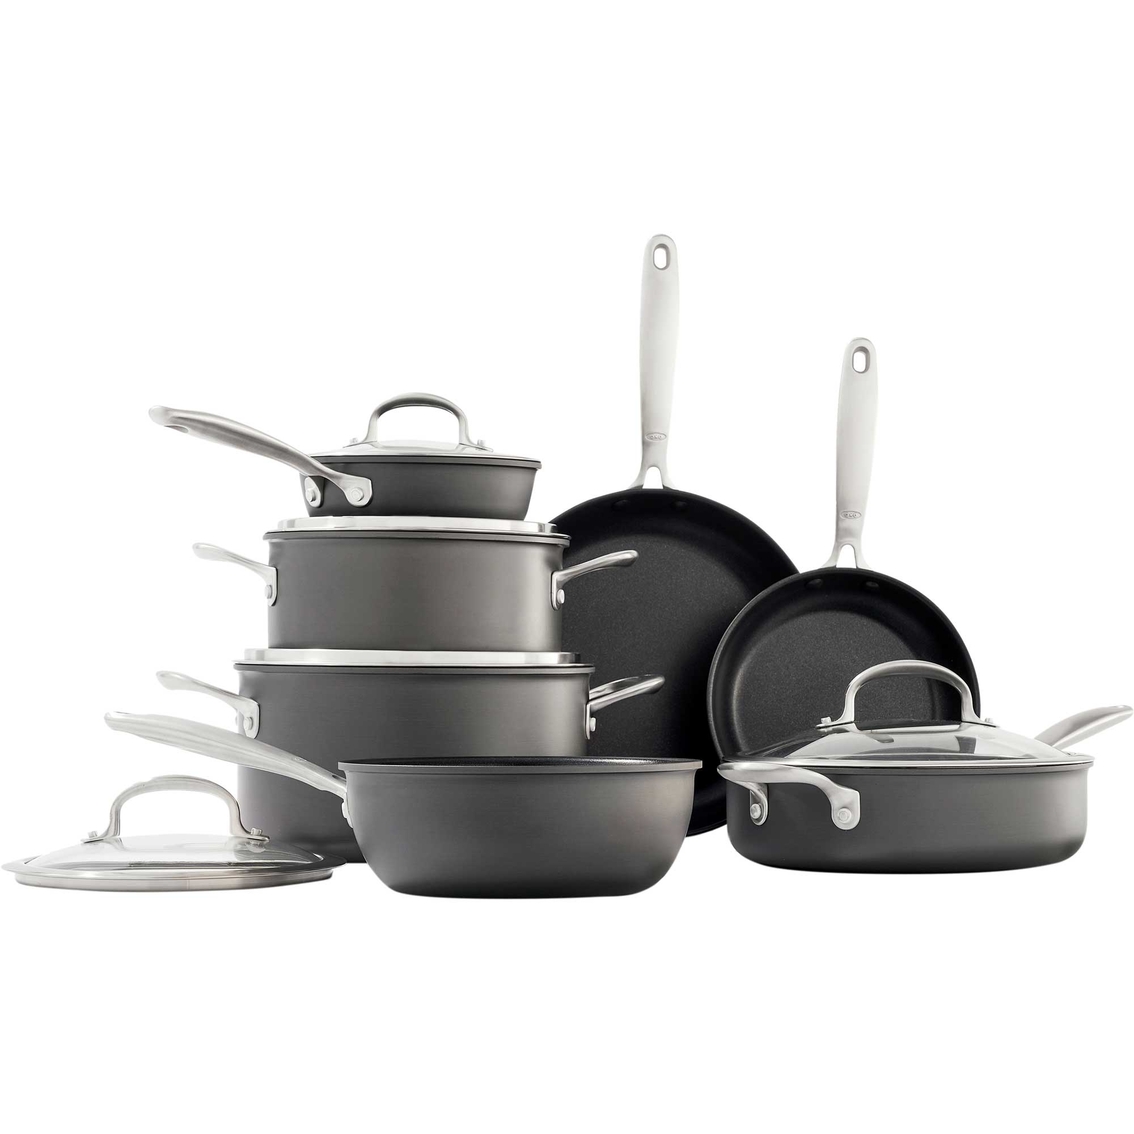 Oxo Good Grips Non-stick Pro 12 Pc. Cookware Set, Cookware Sets, Household